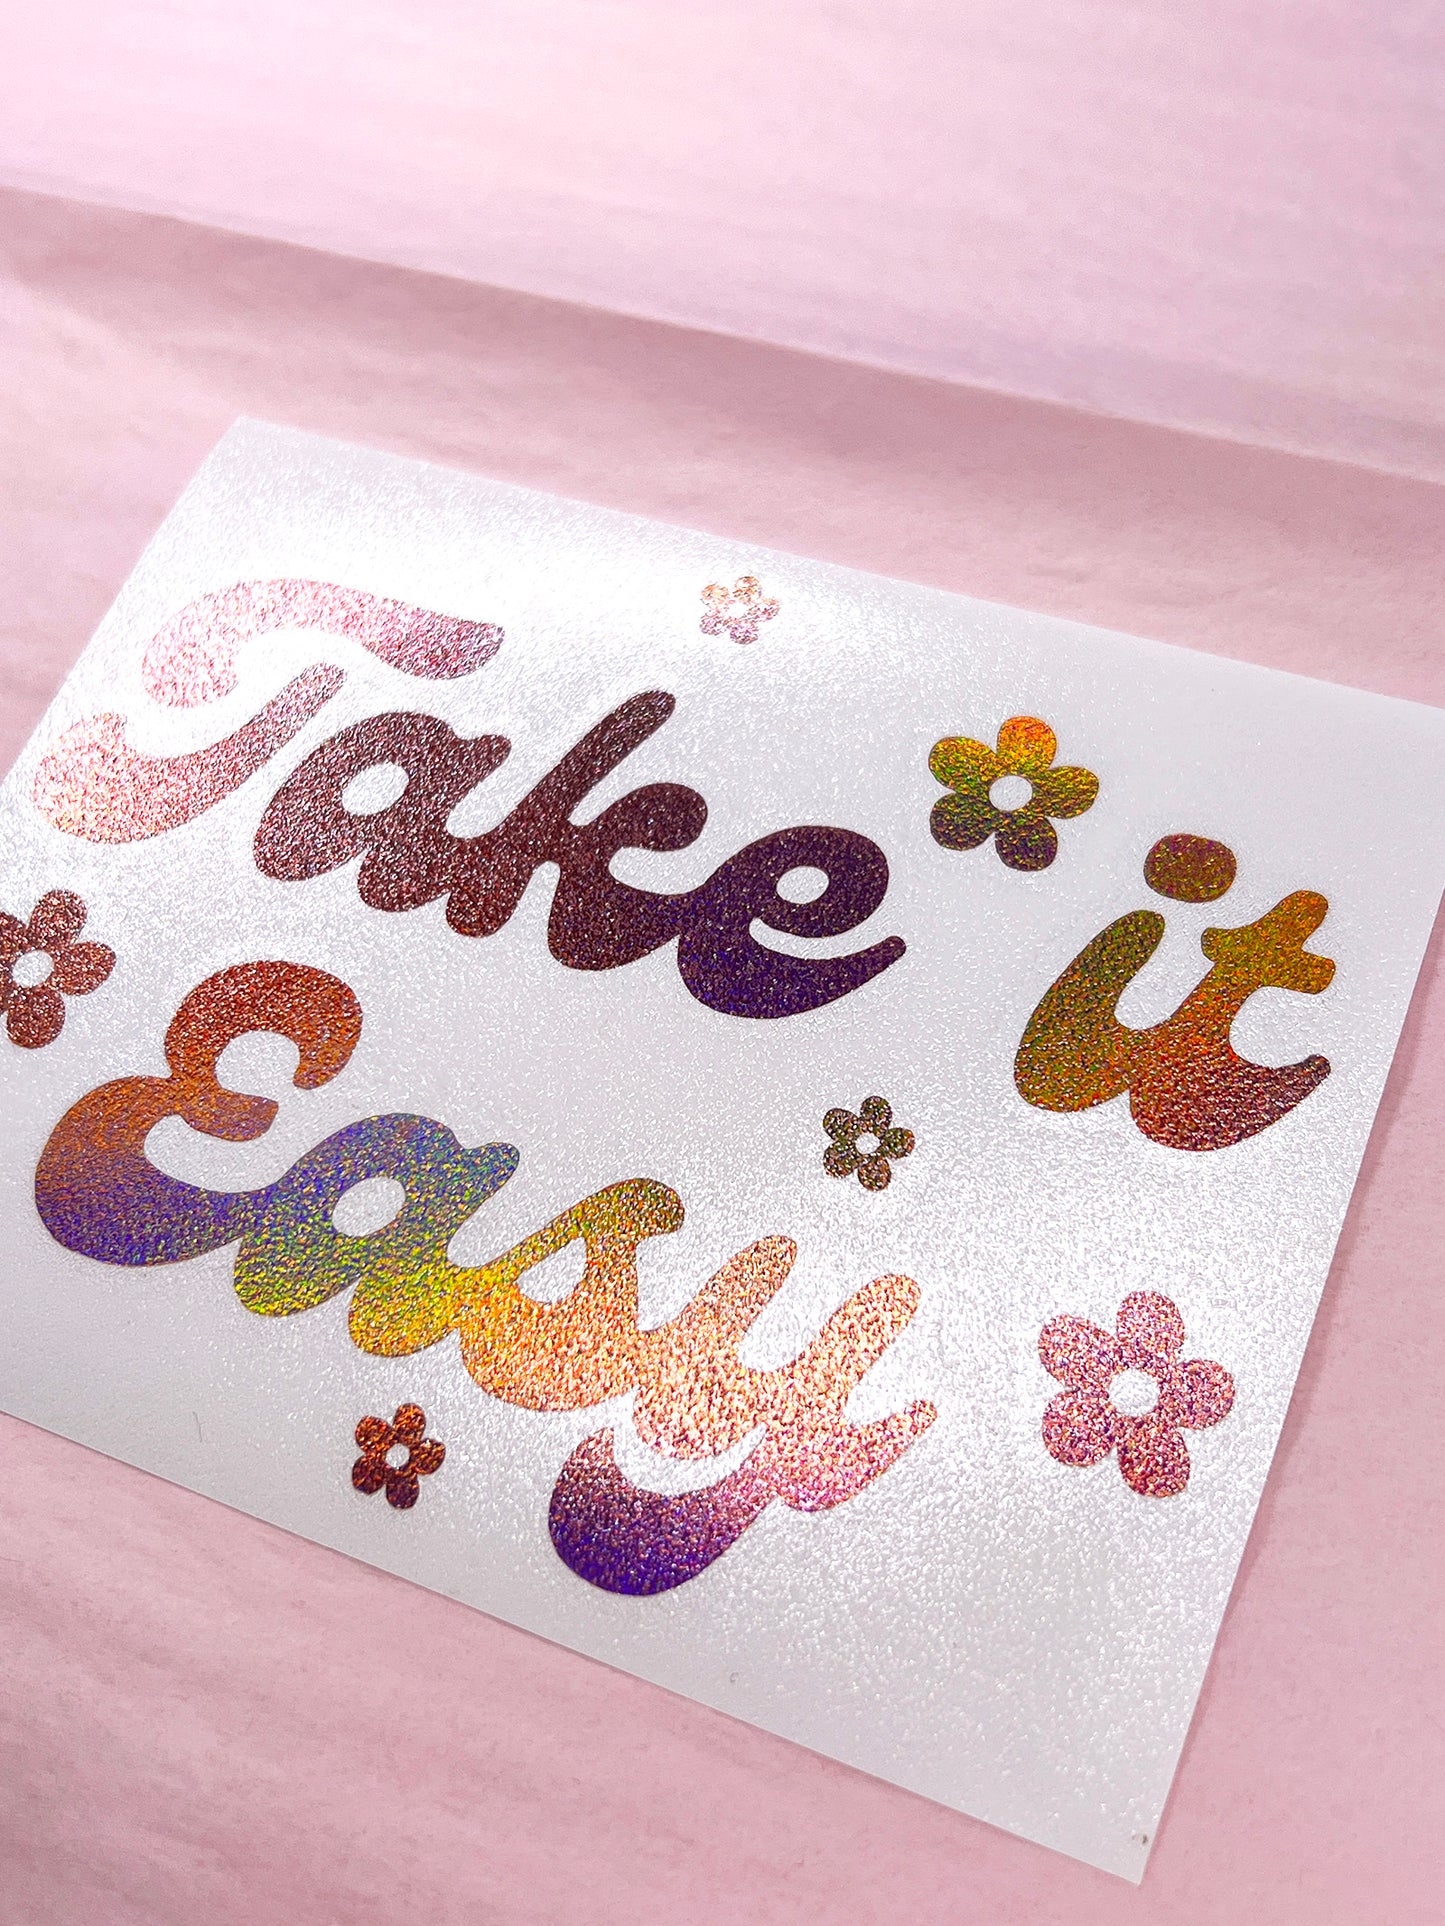 Take it Easy Decal